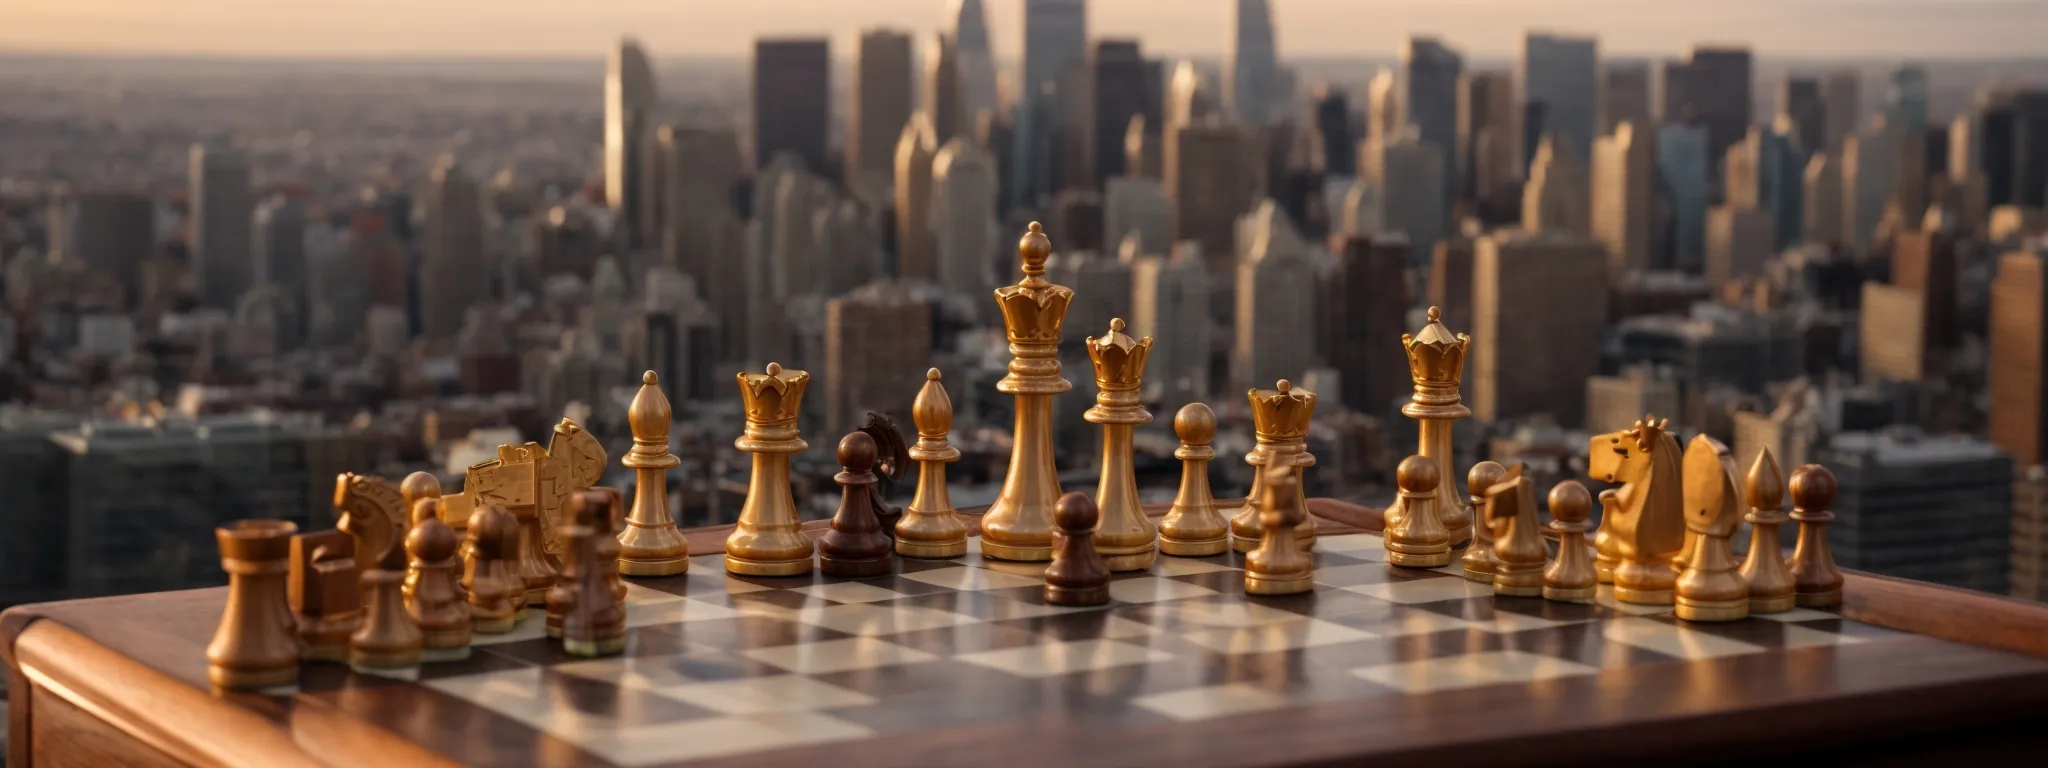 a chessboard with a single king piece strategically positioned, overlooking the skyline of a bustling american cityscape at sunset.